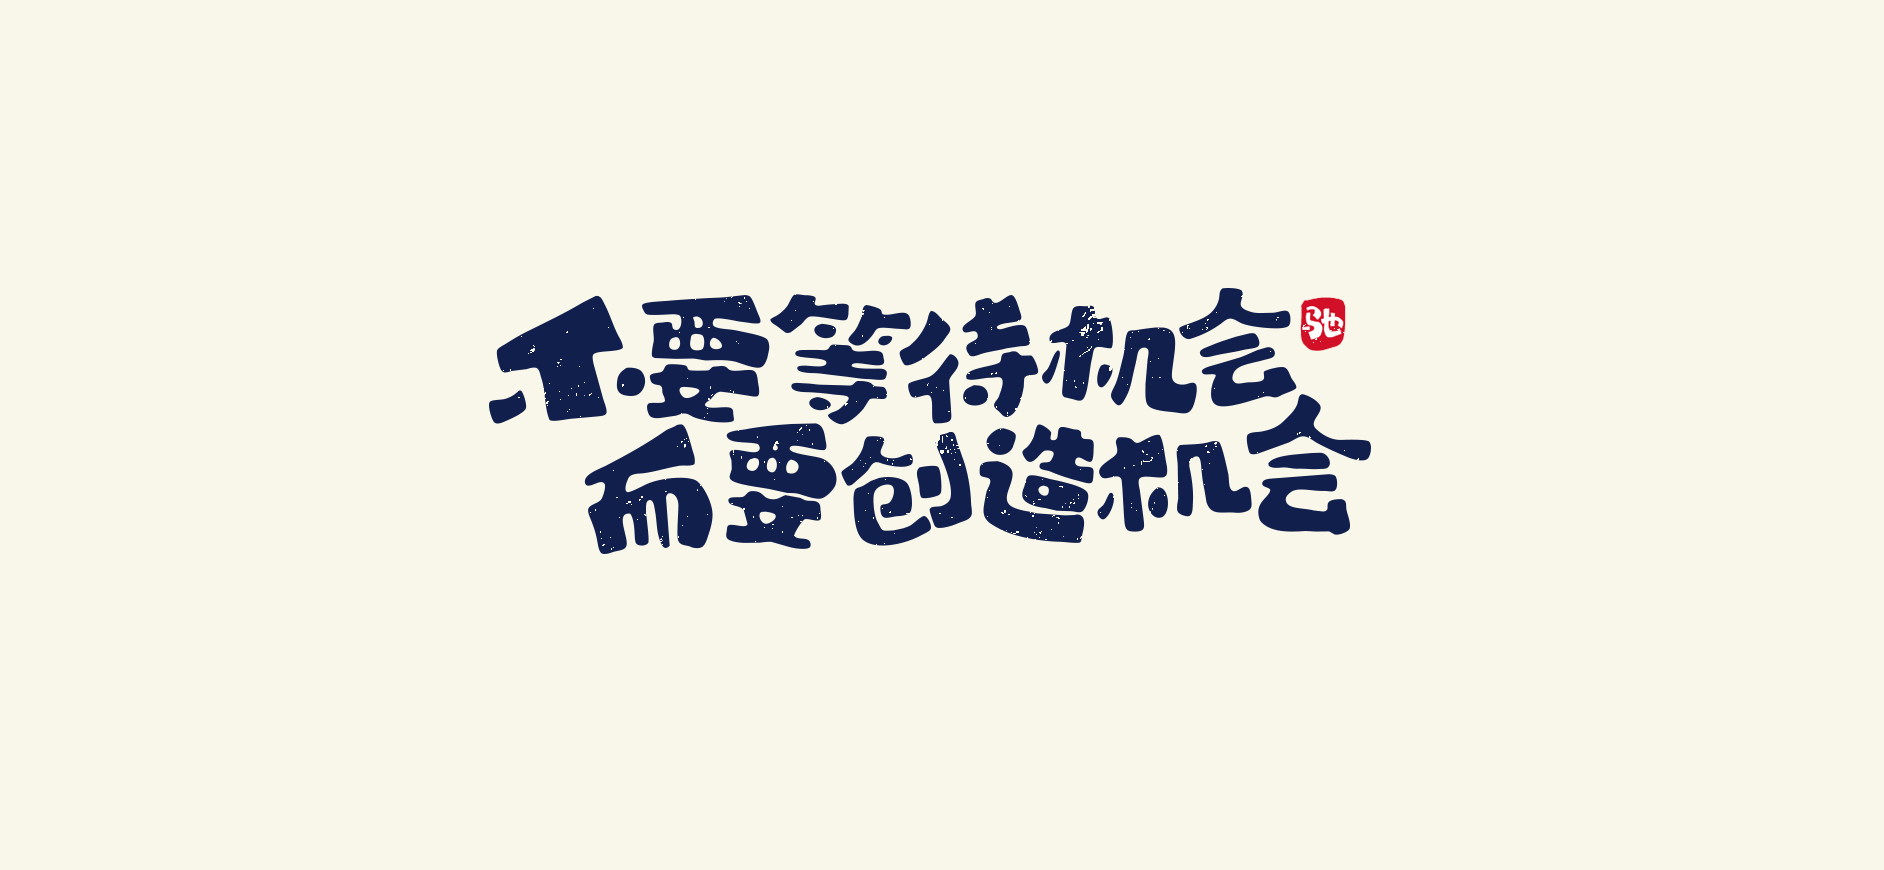 Interesting Chinese Creative Font Design-Inspirational quotes